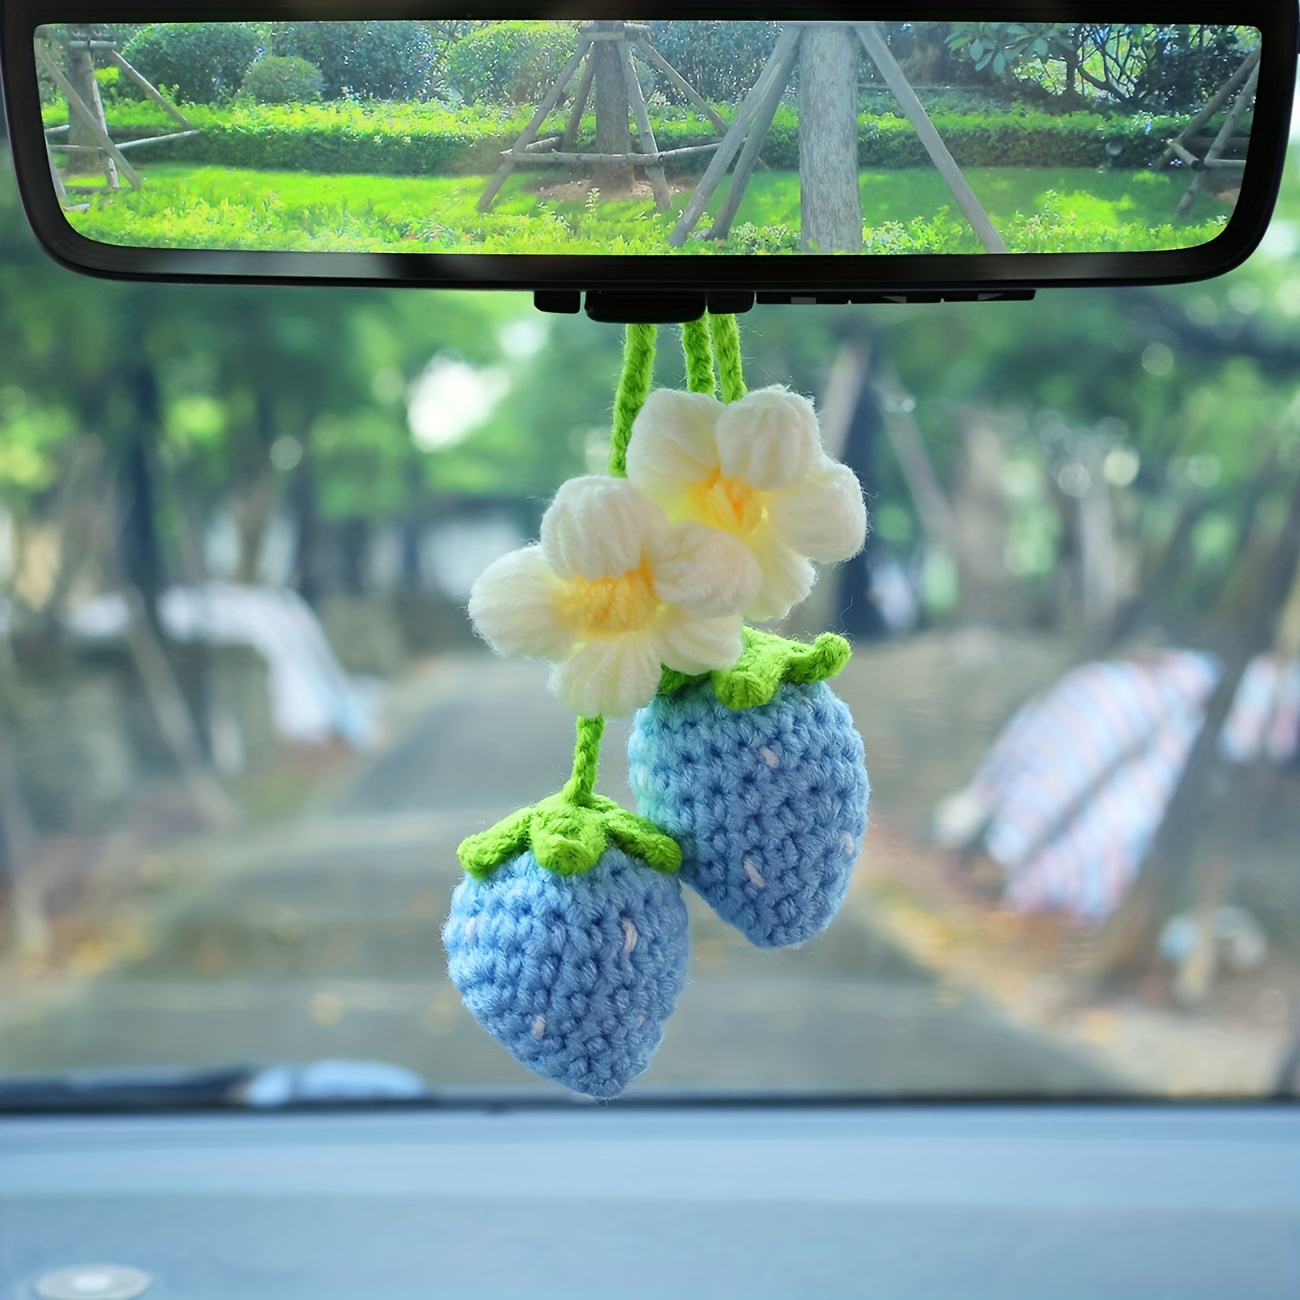 Girly car accessories -  France